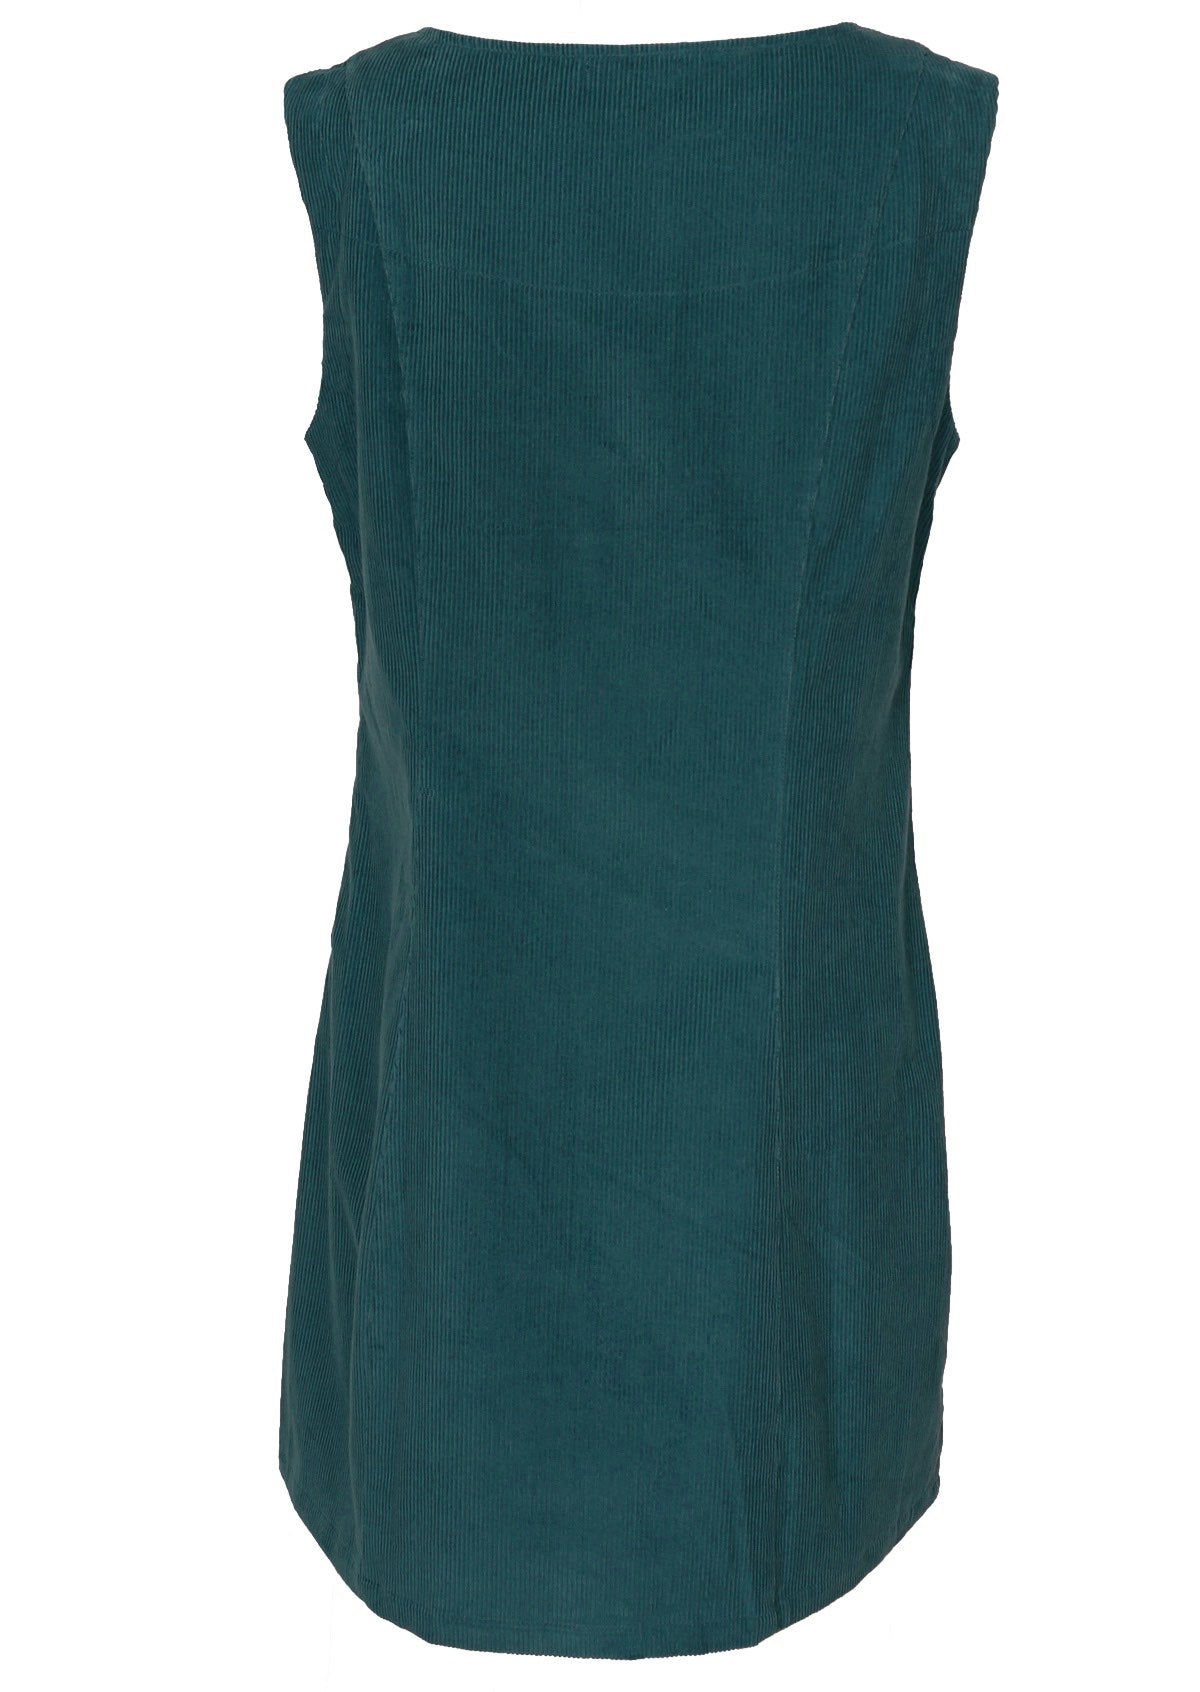 Flattering 100% cotton corduroy tunic in a deep teal colour. 